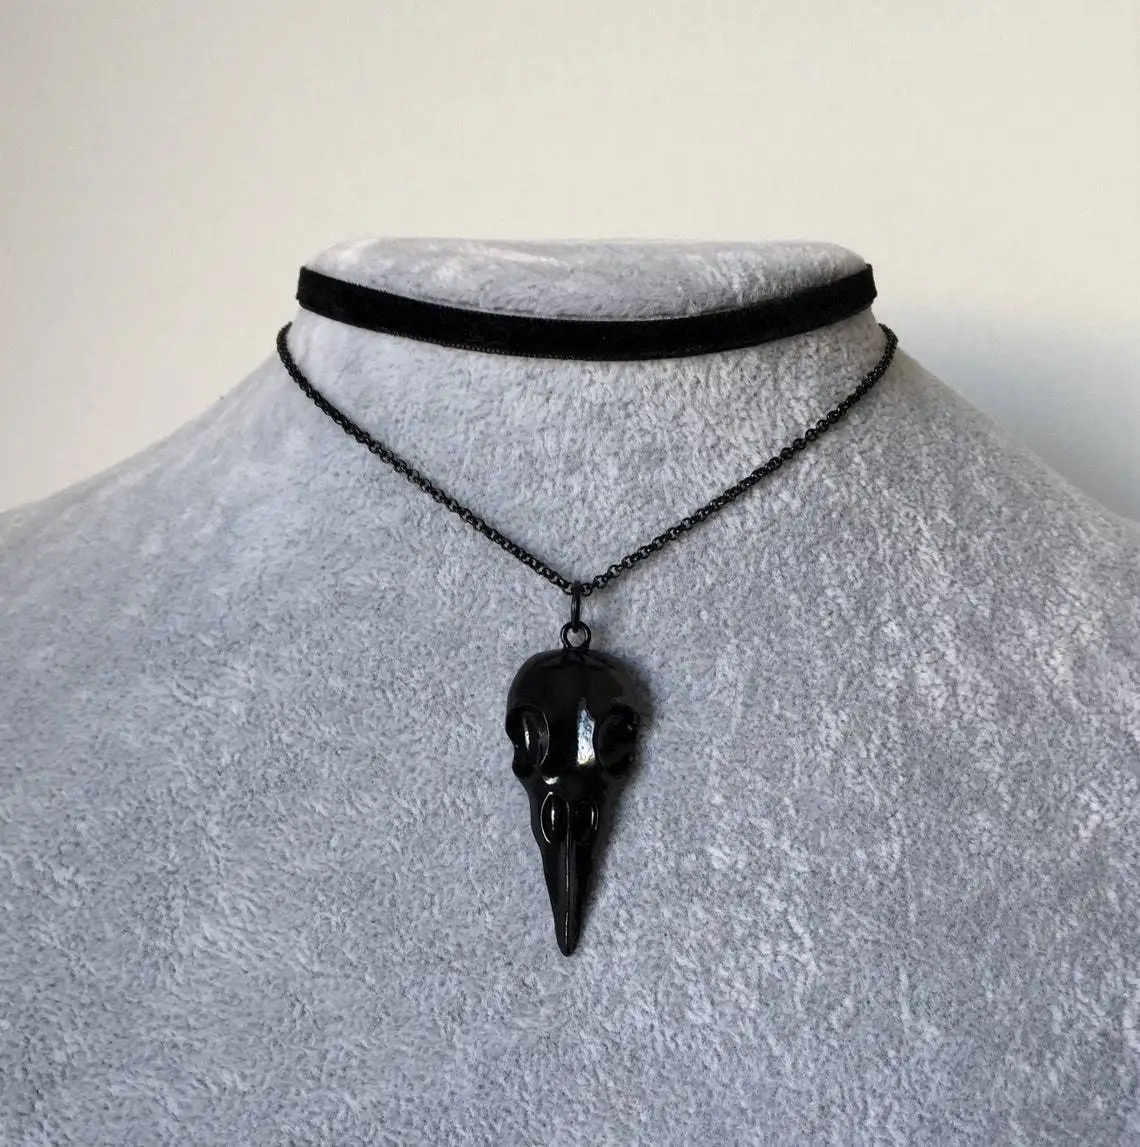 

Gothic Mystery Raven Skull Charm Choker for Women Fashion Witch Accessories Jewelry Gifts Goth Black Velvet Necklace Handmade